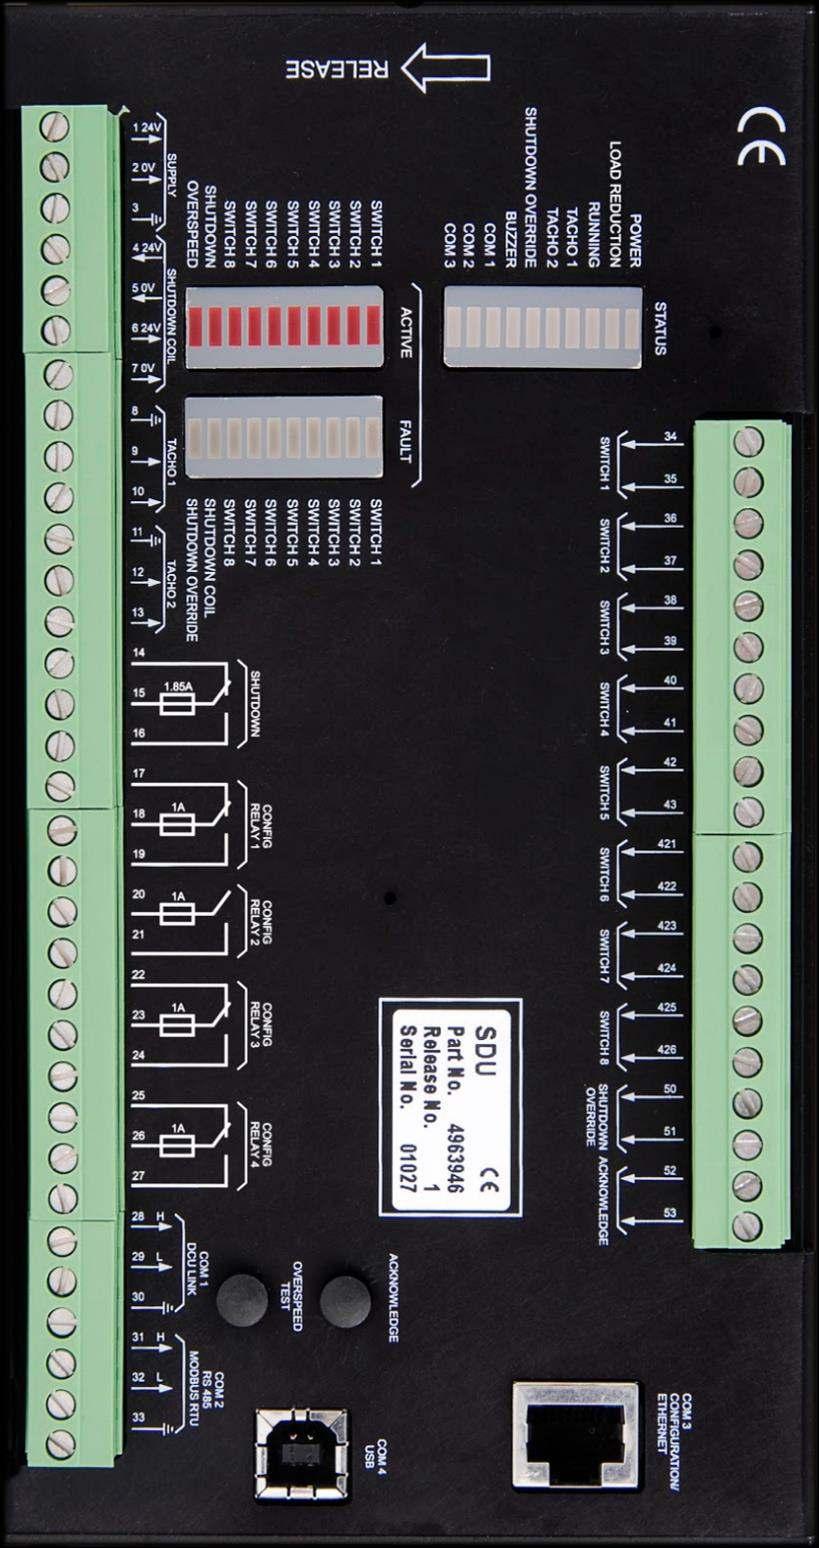 Appendix A Front Front side and Connectors Power Supply Shutdown Coil Inputs: Tacho/MPU Input 1&2 Switch 1 Switch 2 Switch 3 Relays: Shutown Switch 4 Config Relay 1 Config Relay 2 Config